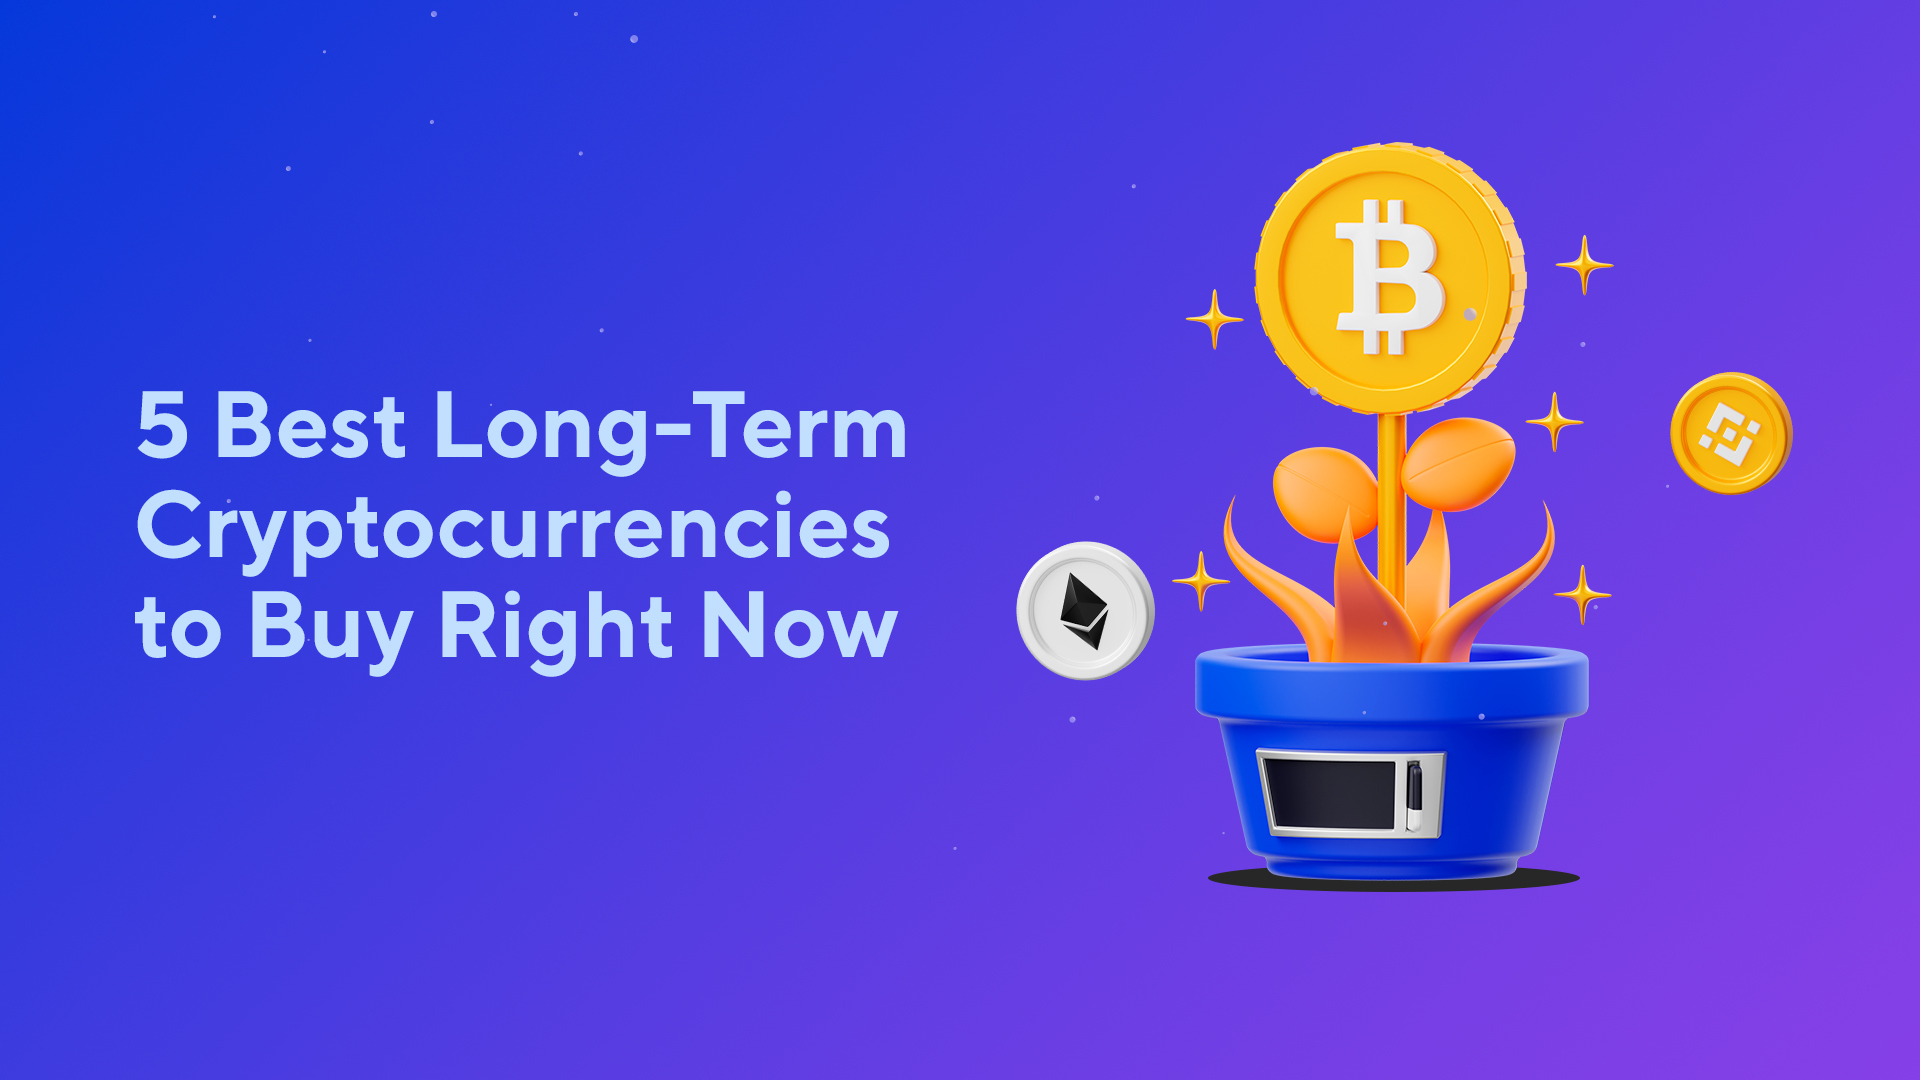 5 Best Long-Term Cryptocurrencies to Buy Right Now